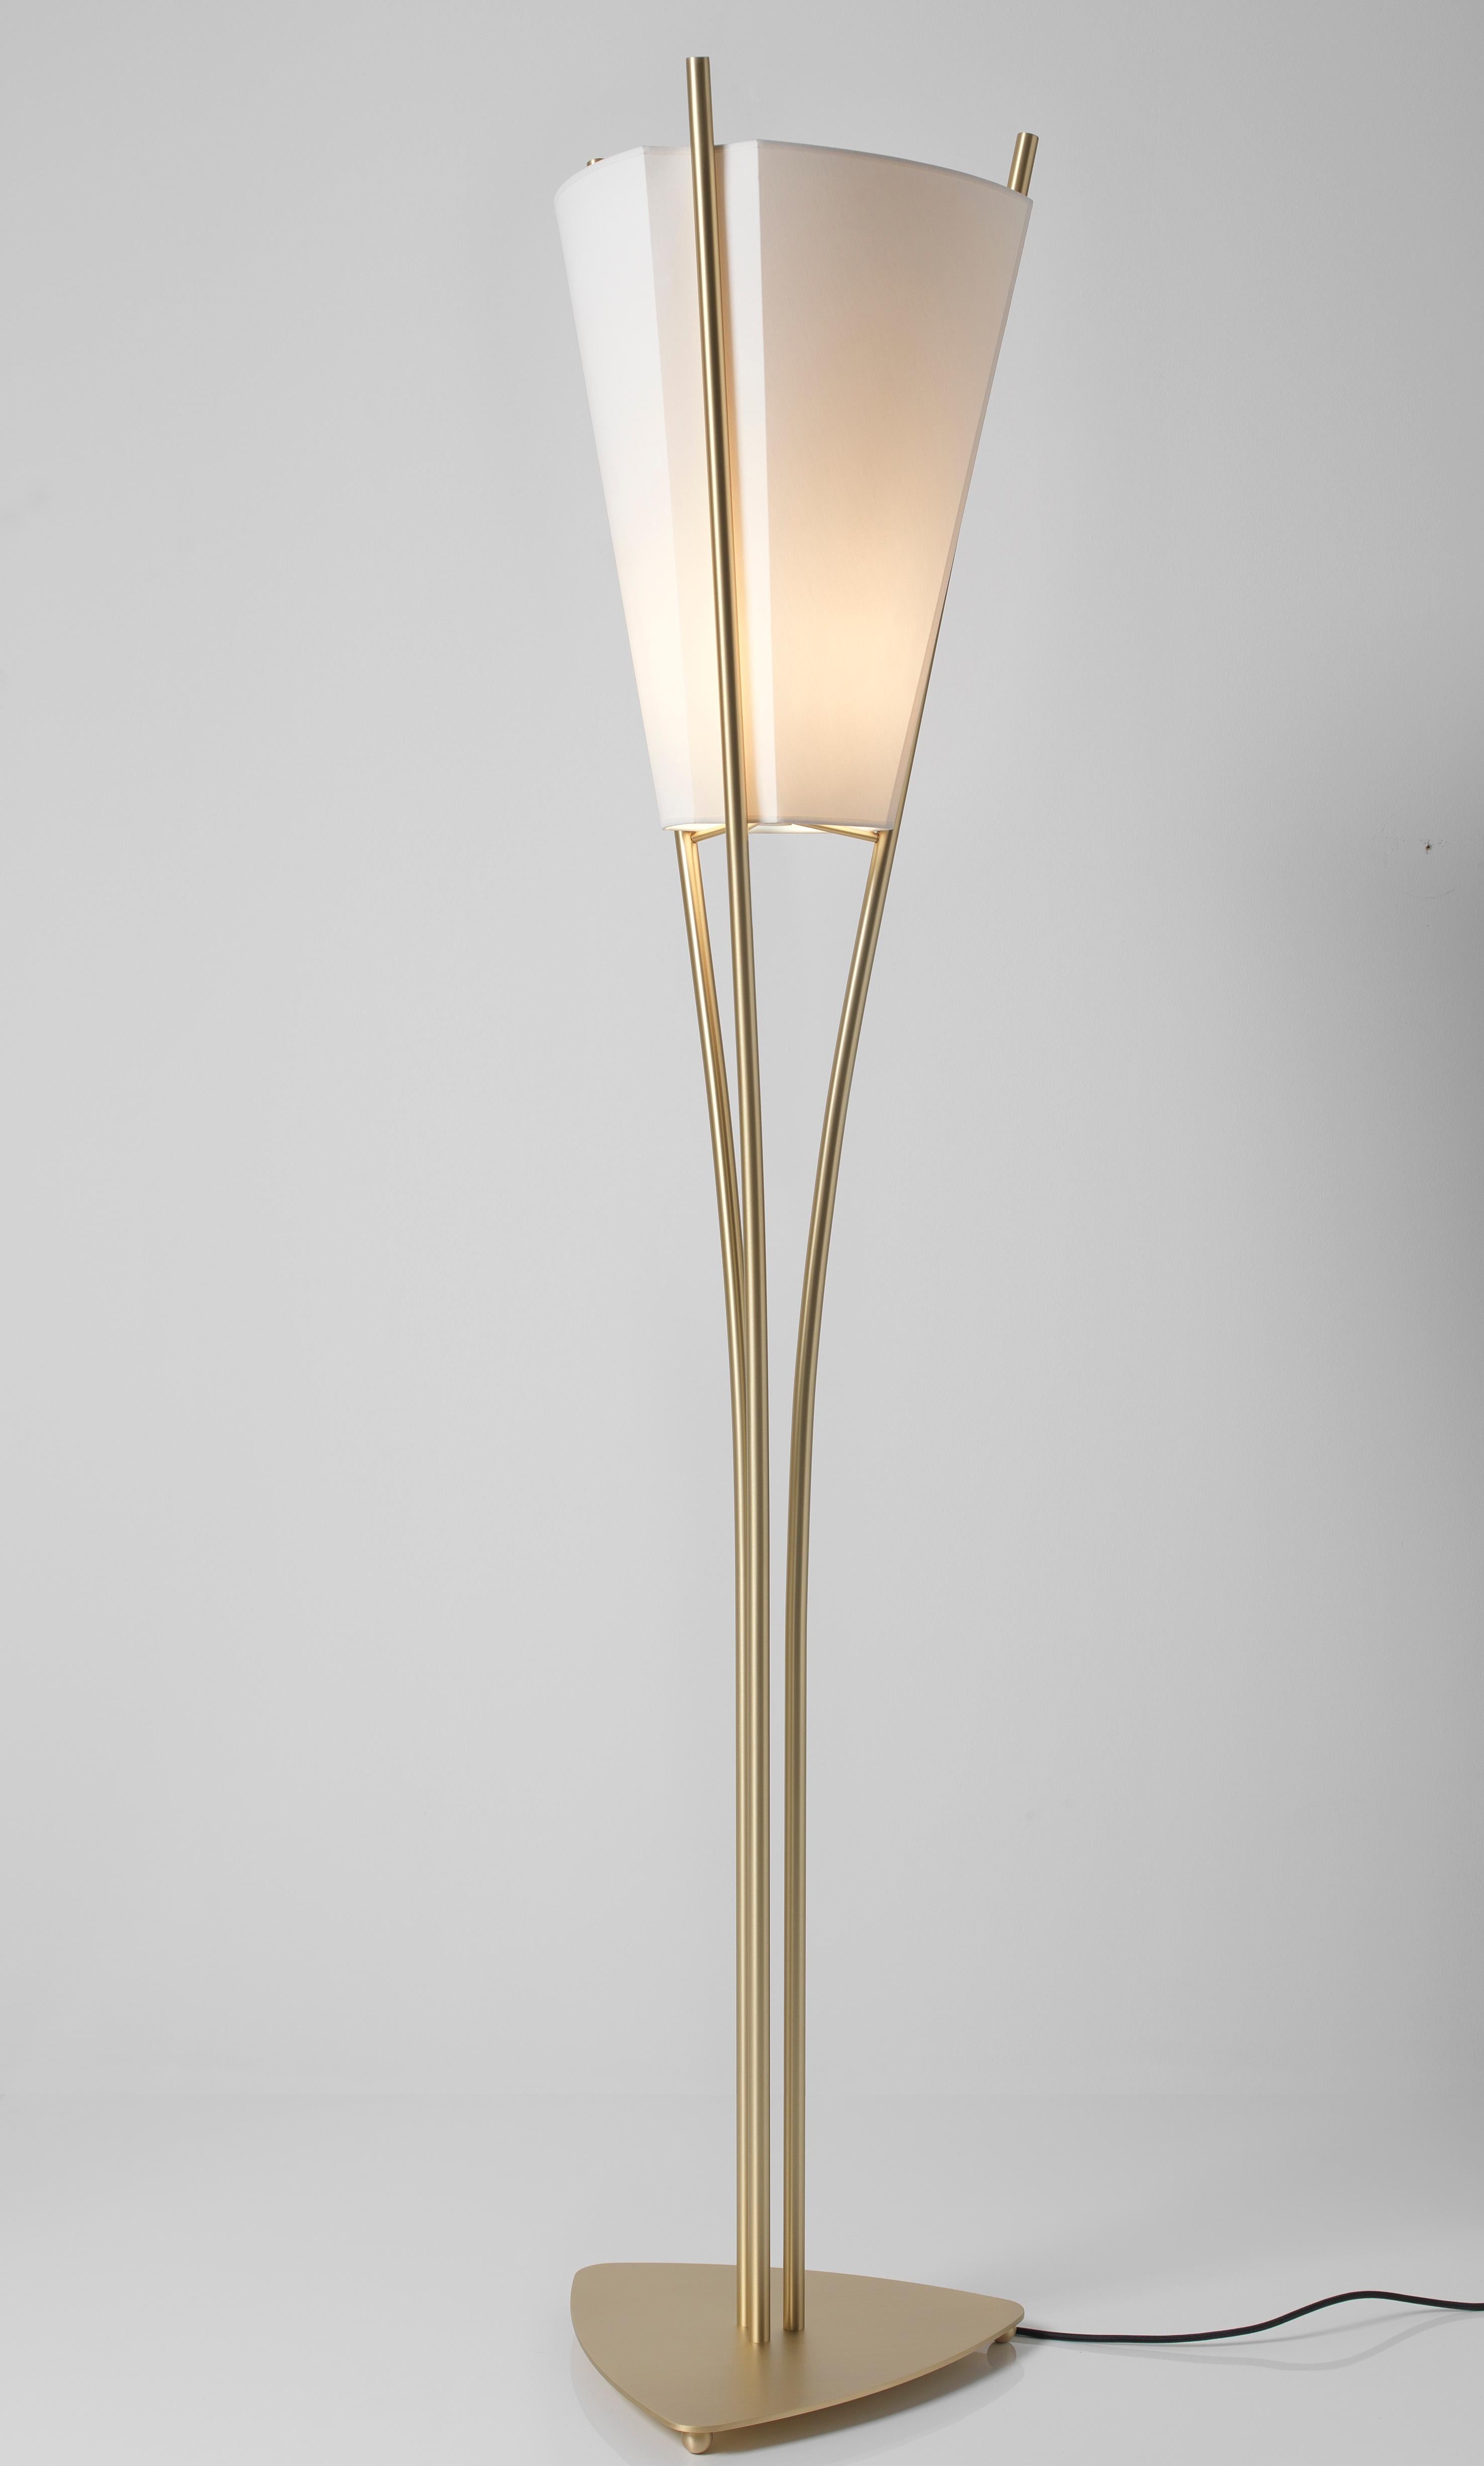 Curve XL floor lamp by Emilie Cathelineau
Dimensions: D44 x W44 X H50 cm
Materials: Solid brass,Textile lampshade, Black textile cable (2m)
Others finishes and dimensions are available.

All our lamps can be wired according to each country. If